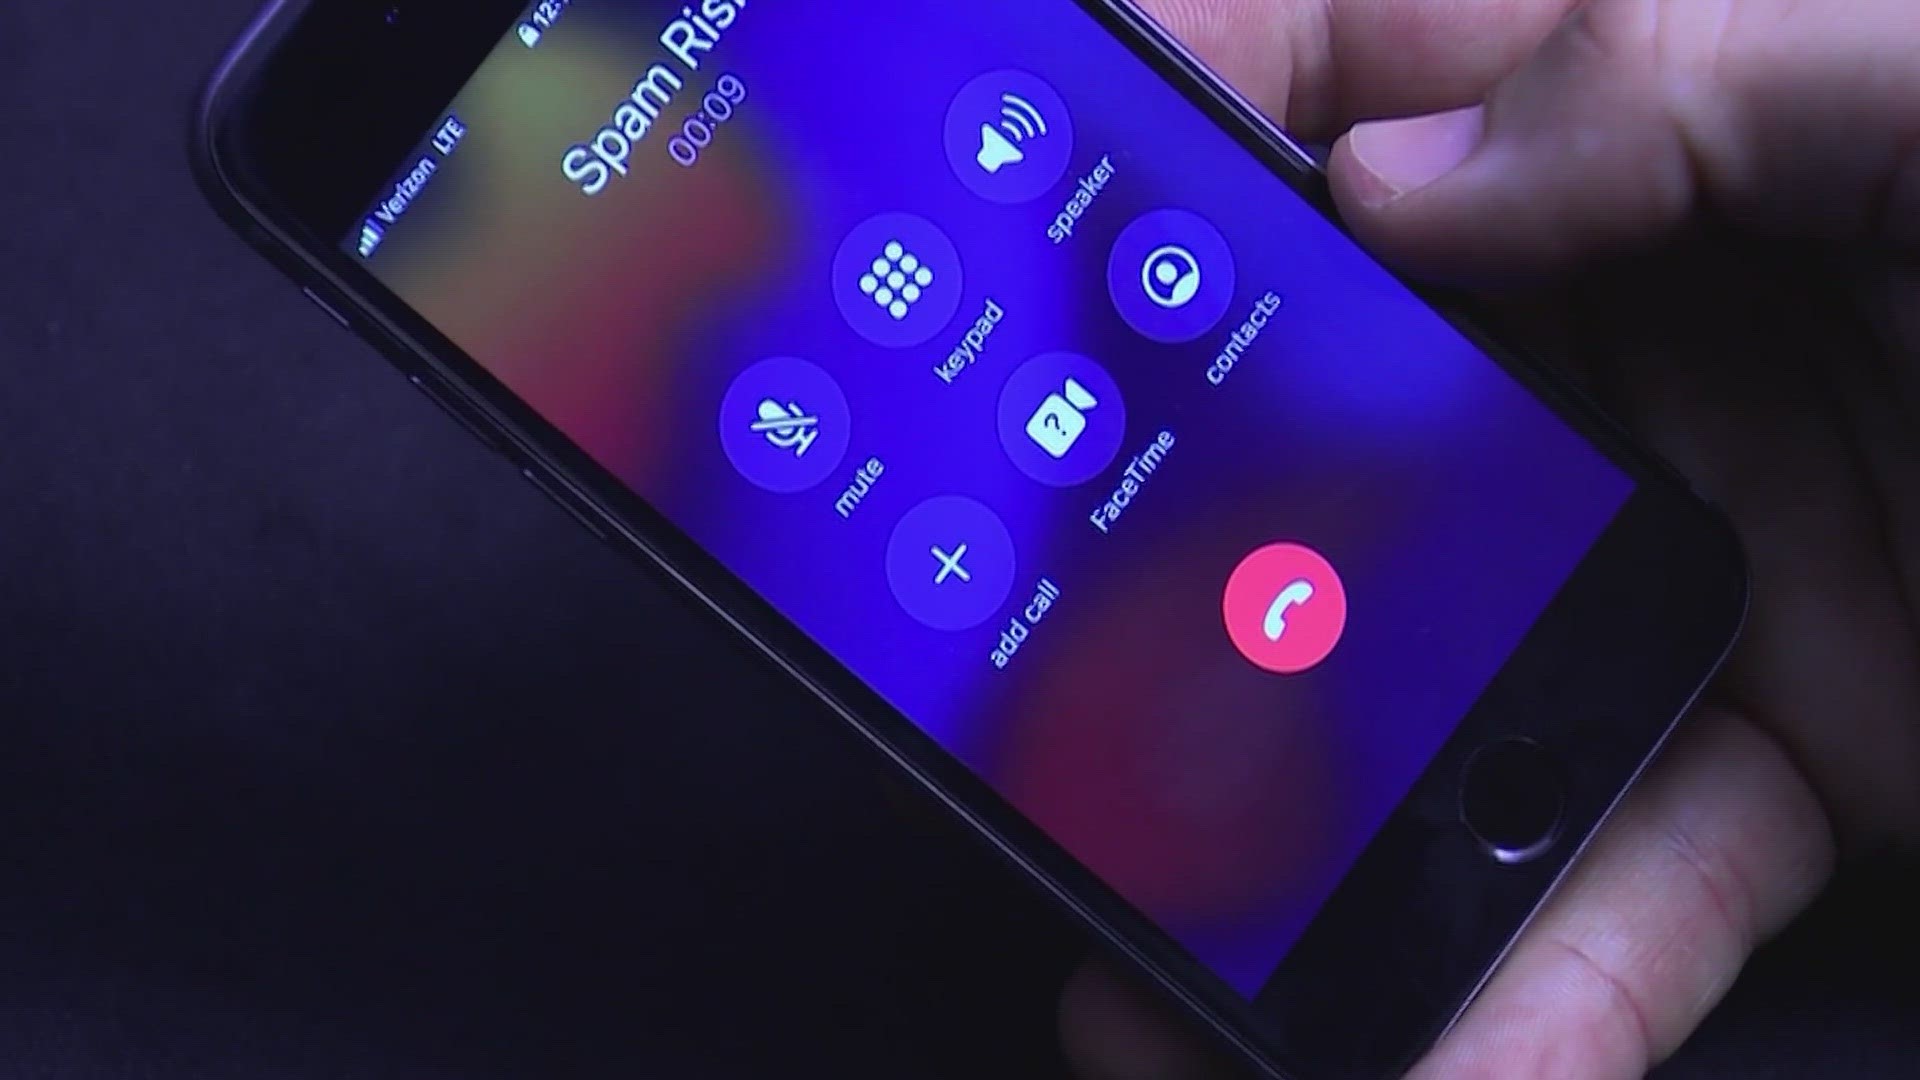 Apple says they are moving the "end call" button to the bottom right of the screen.